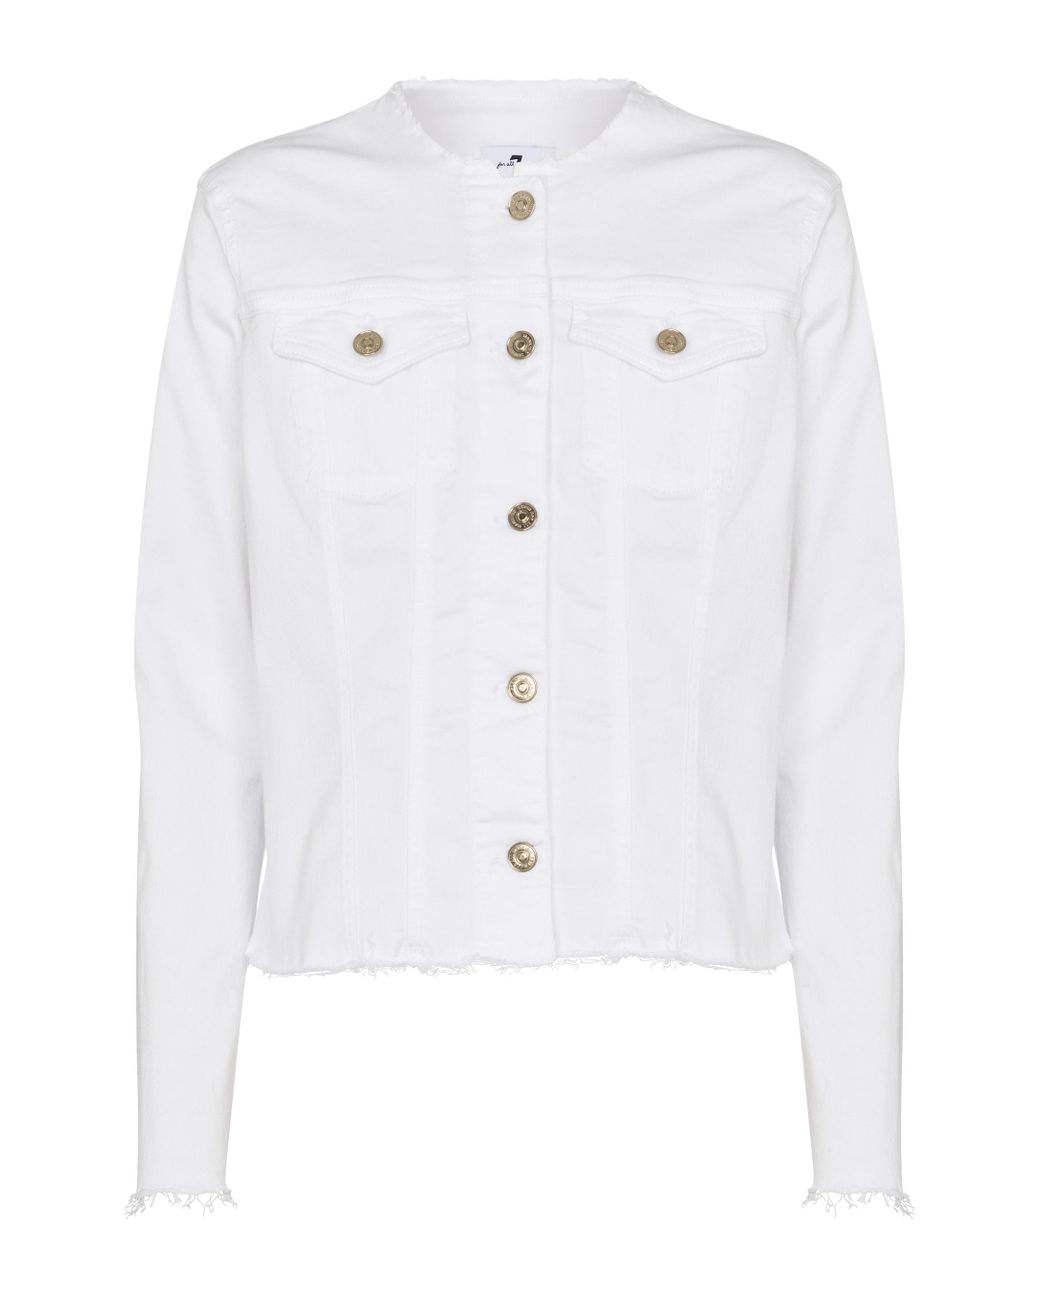 7 For All Mankind Collarless Stretch-denim Jacket in White - Lyst